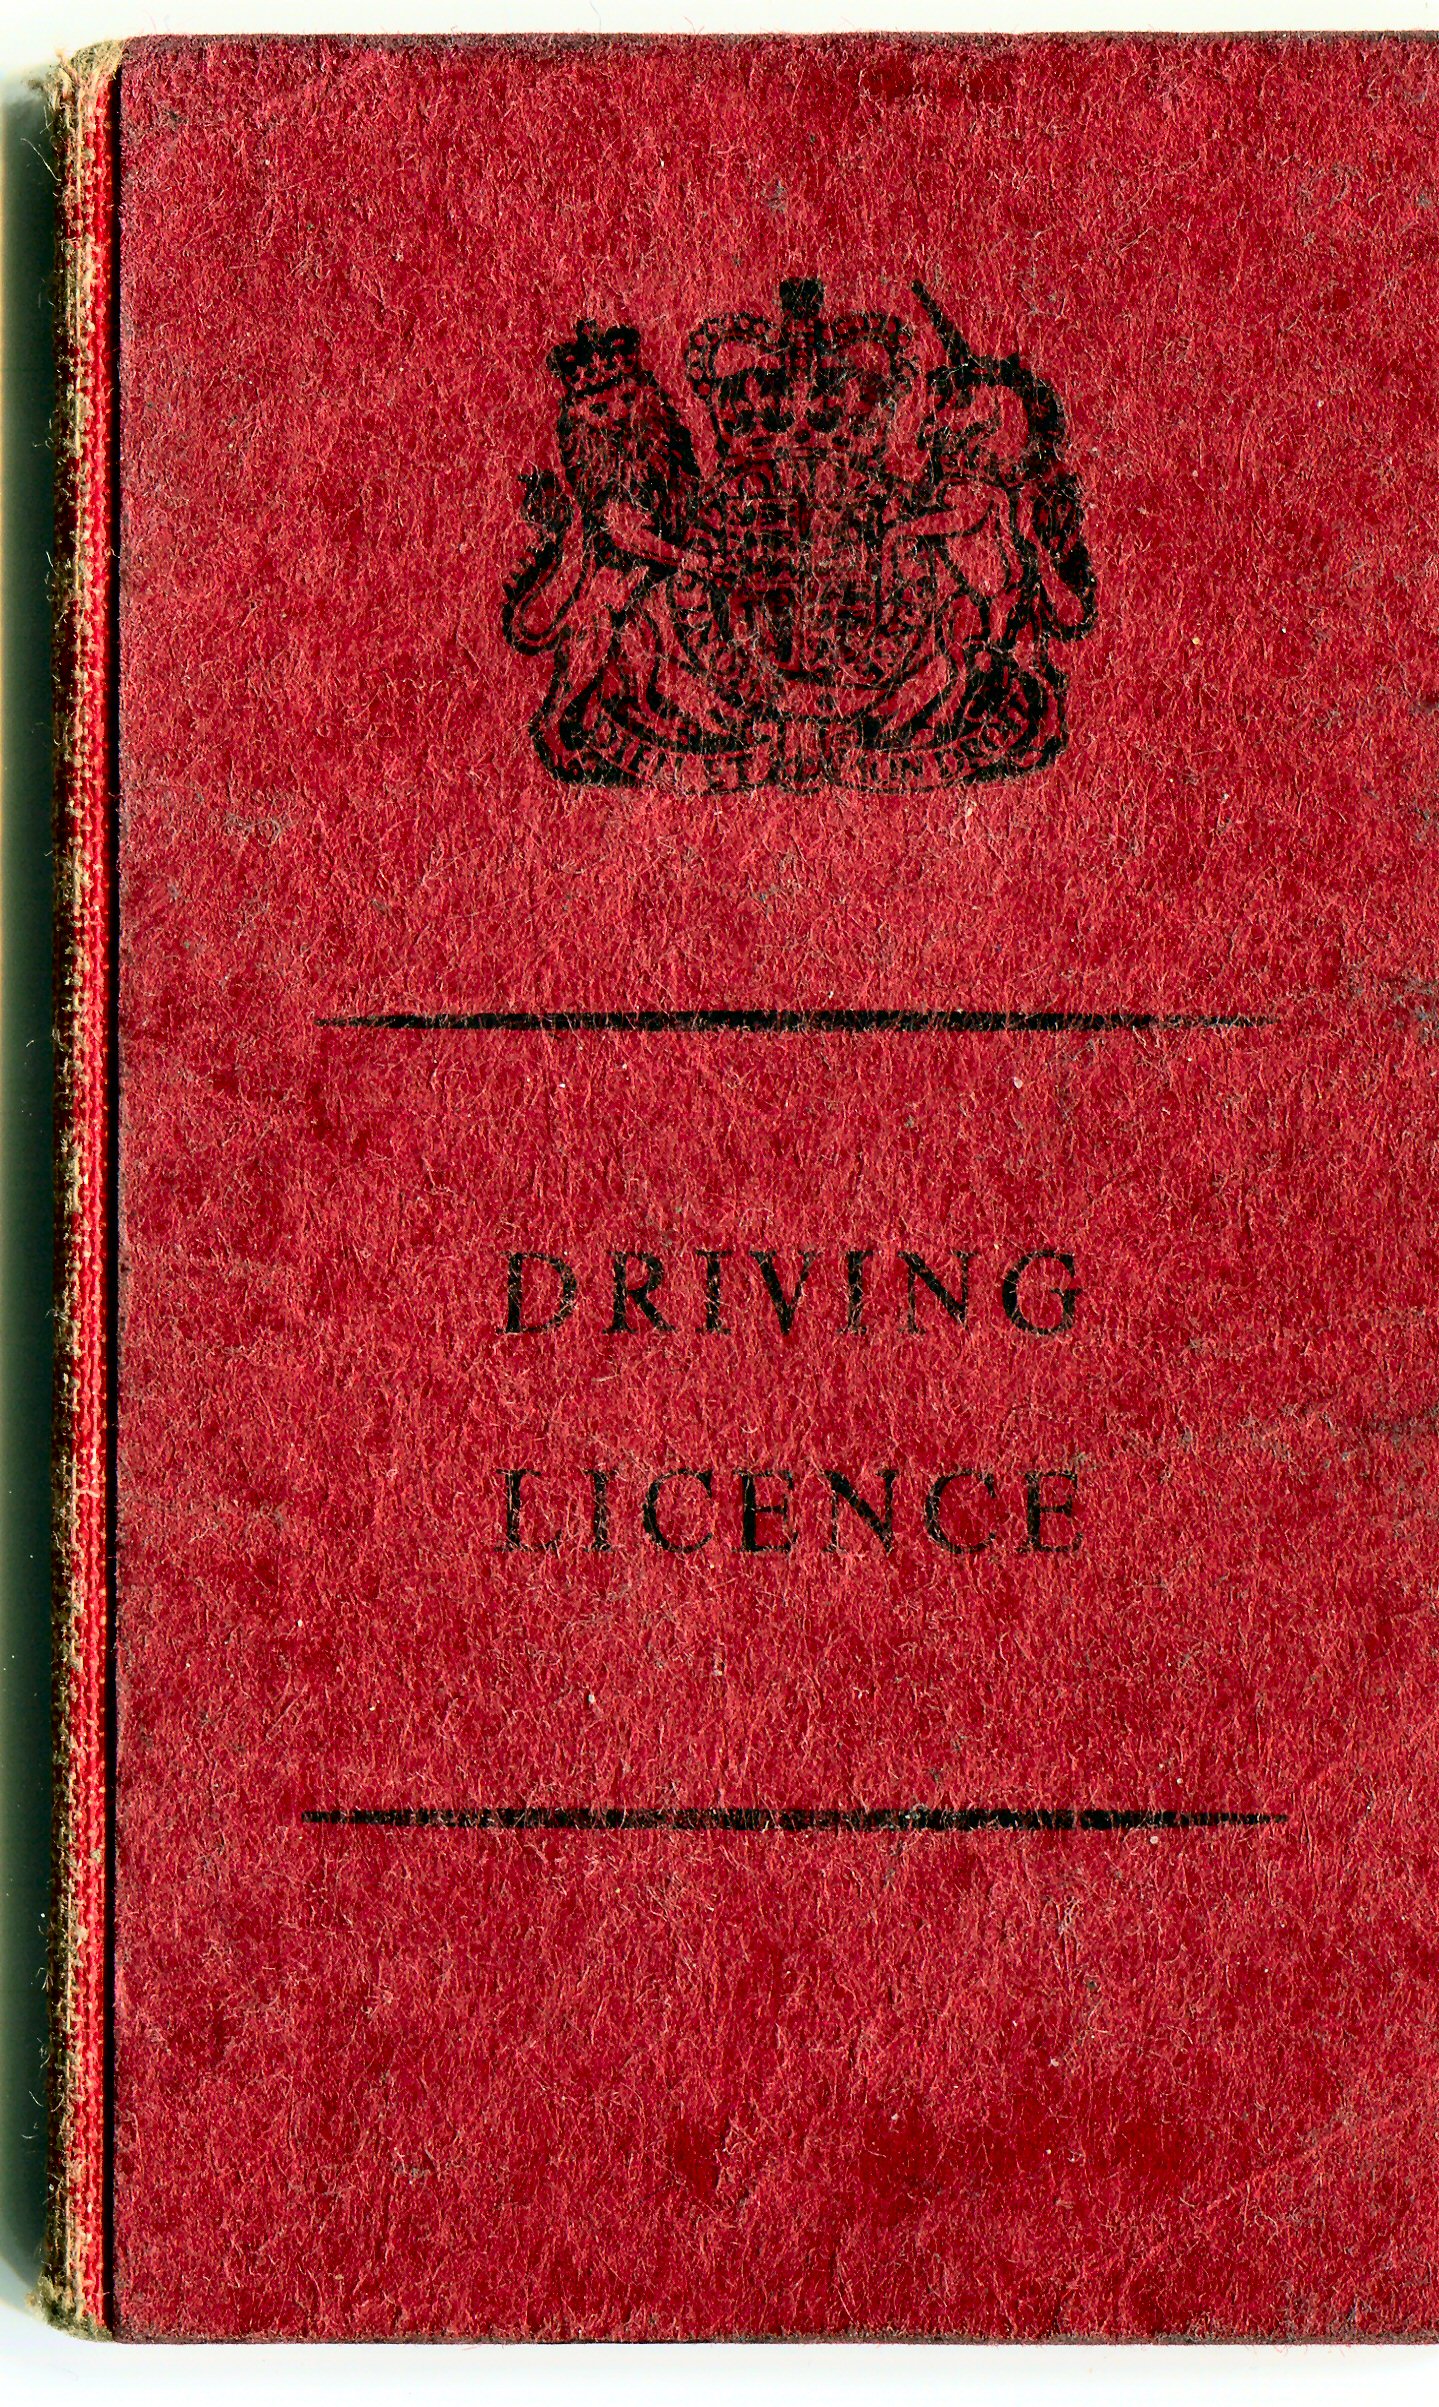 image of a driving license